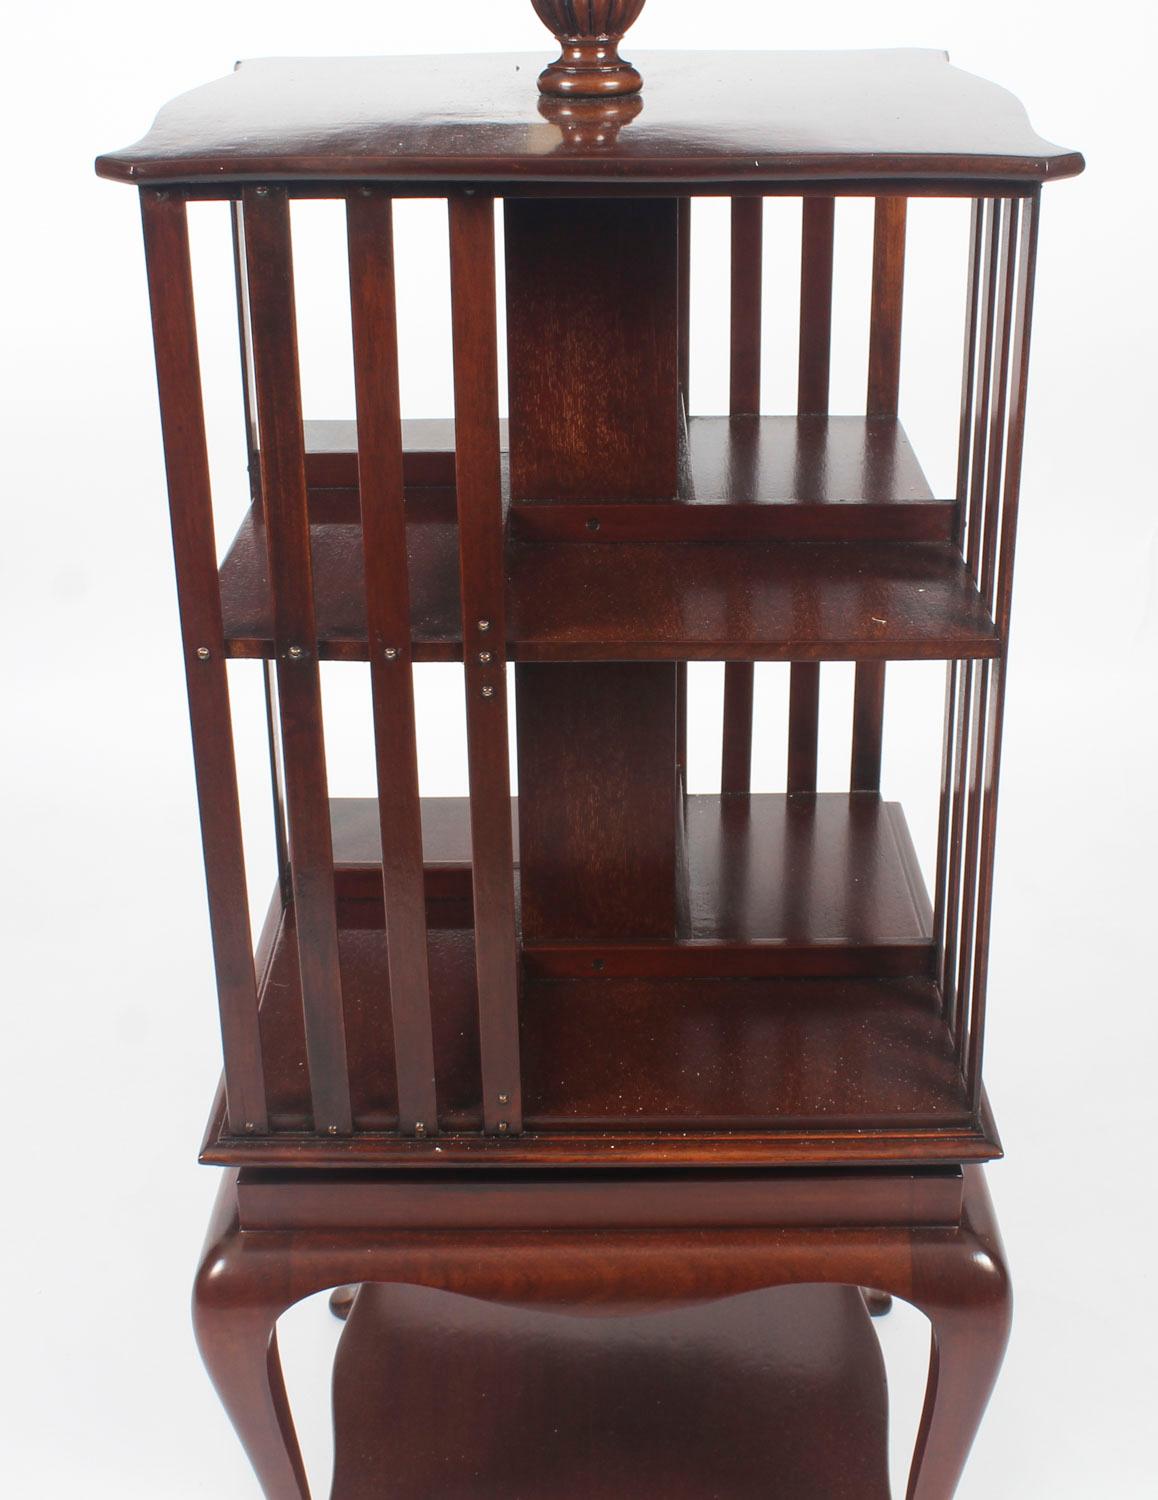 Edwardian Early 20th Century Mahogany Revolving Bookcase Book Stand with Pedestal